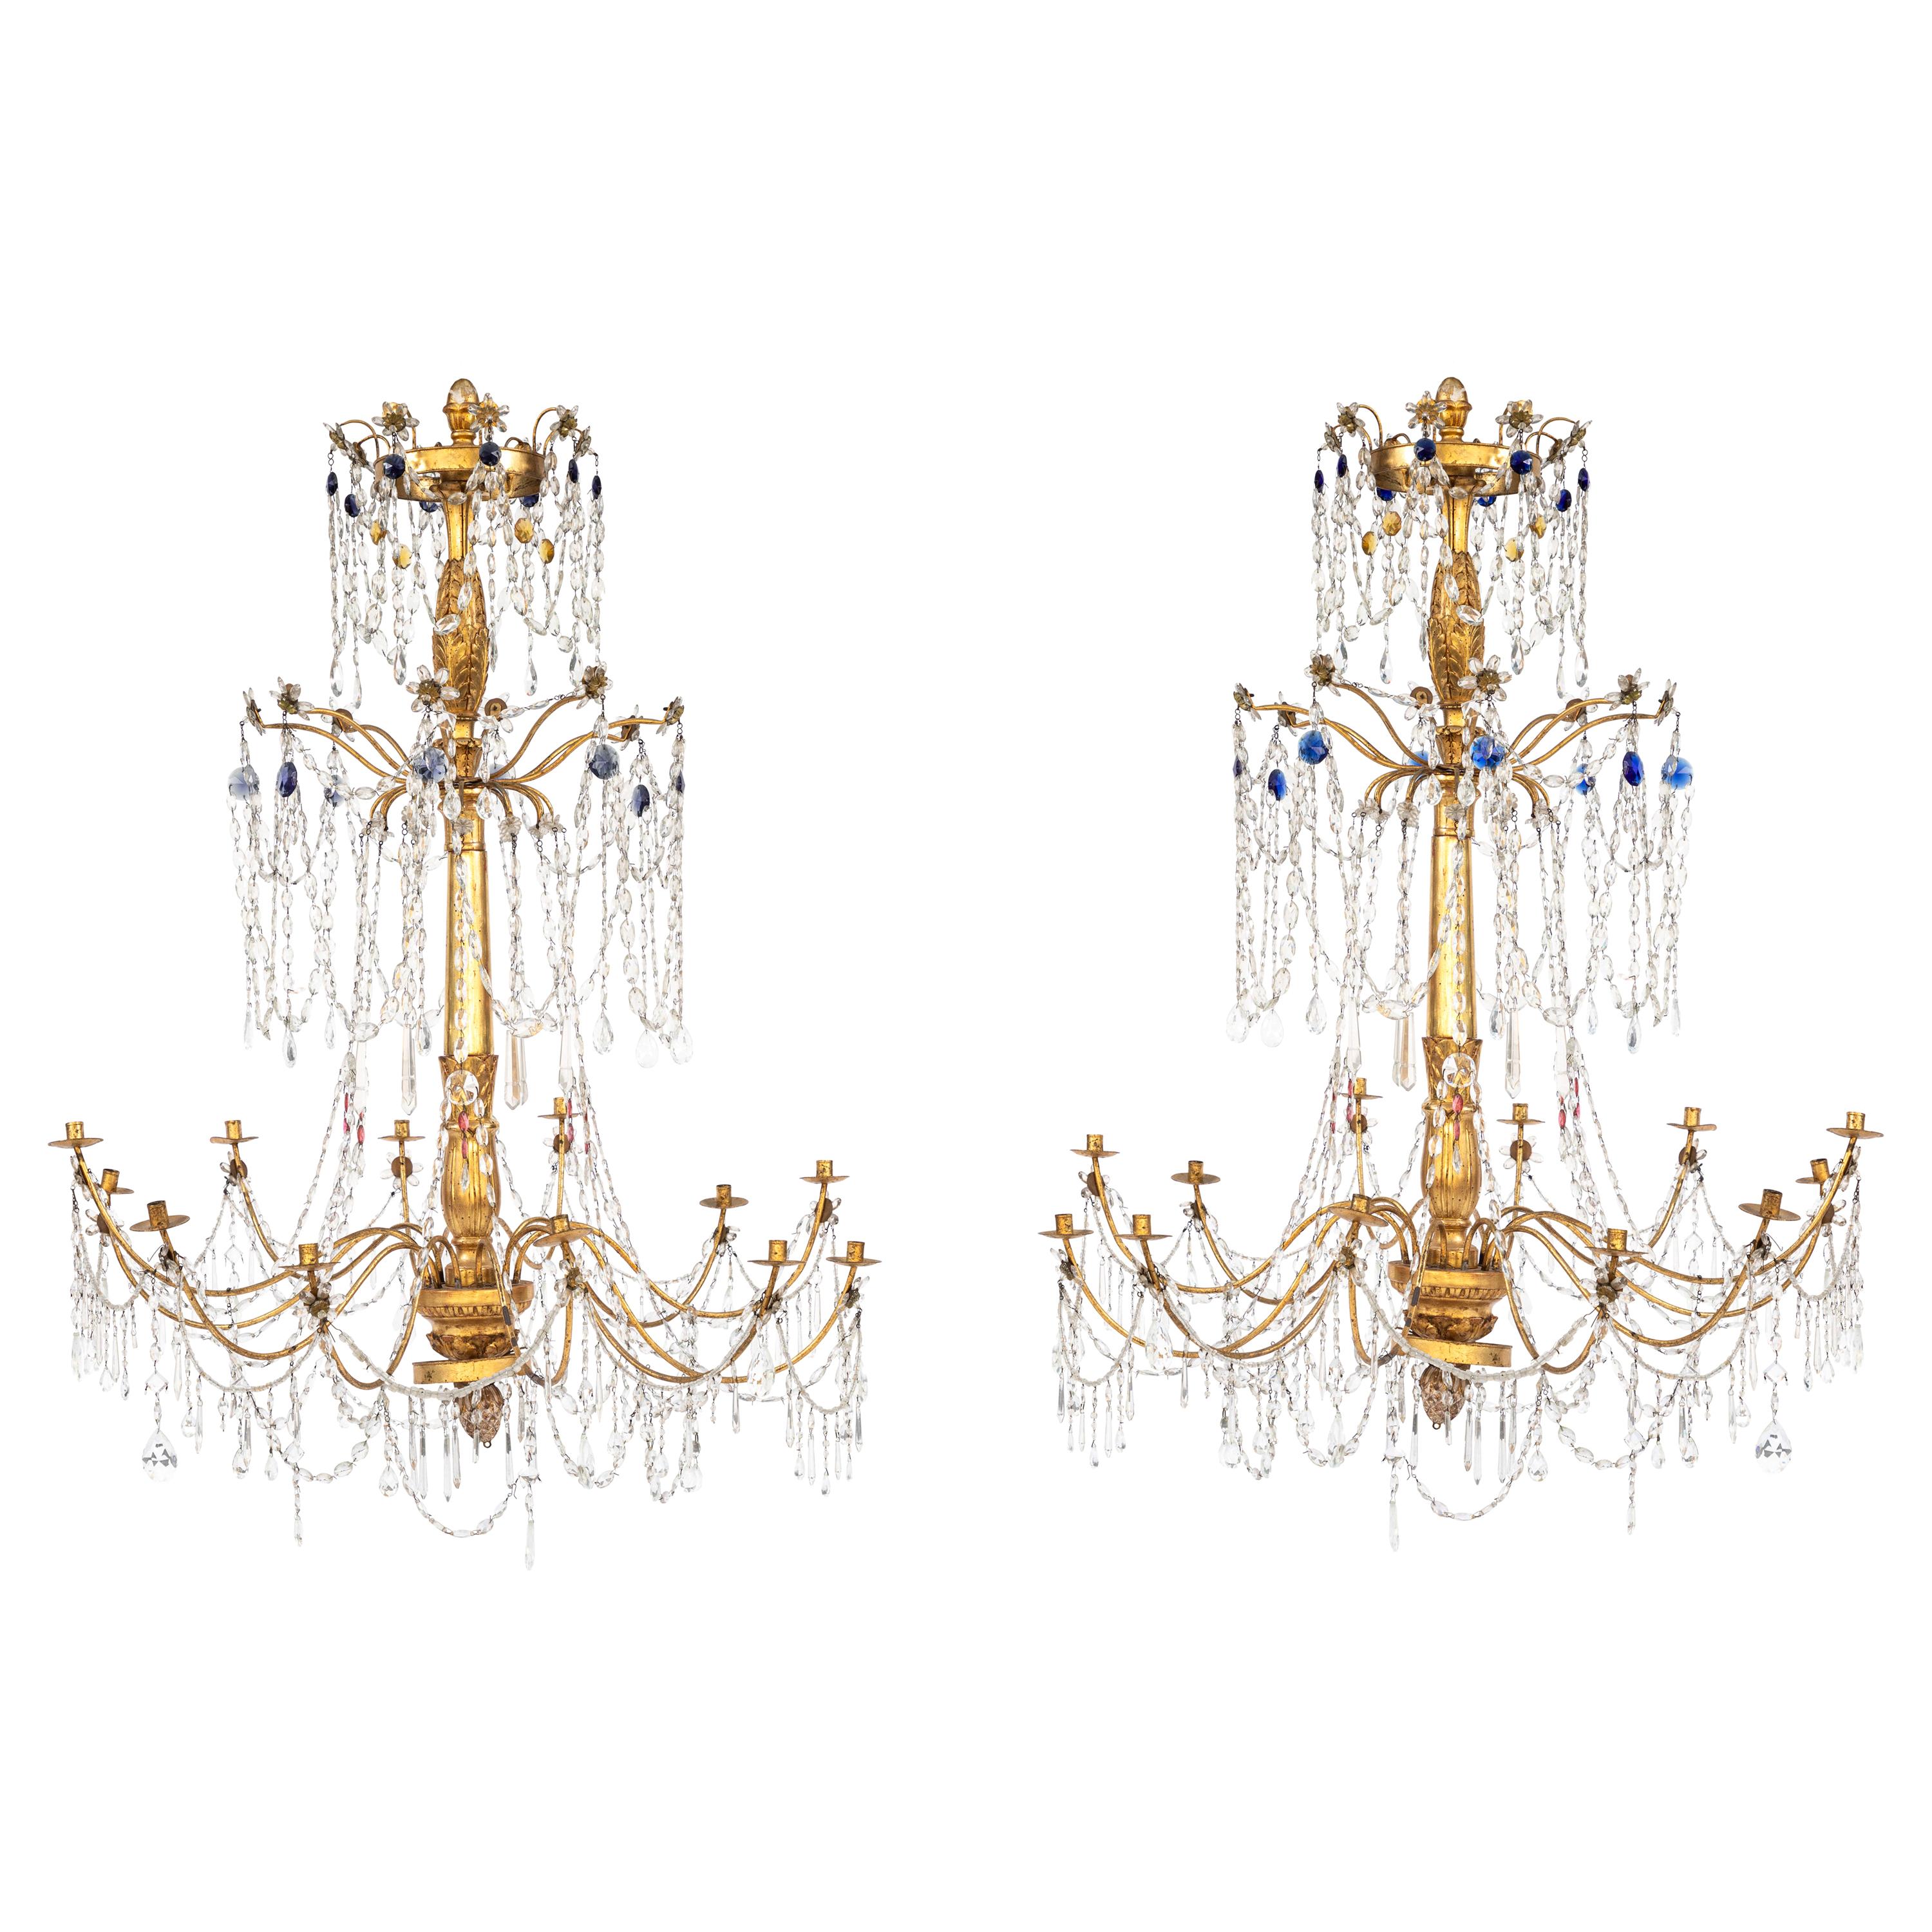 Pair of 18th Century Italian Giltwood and Gilded Iron Chandeliers